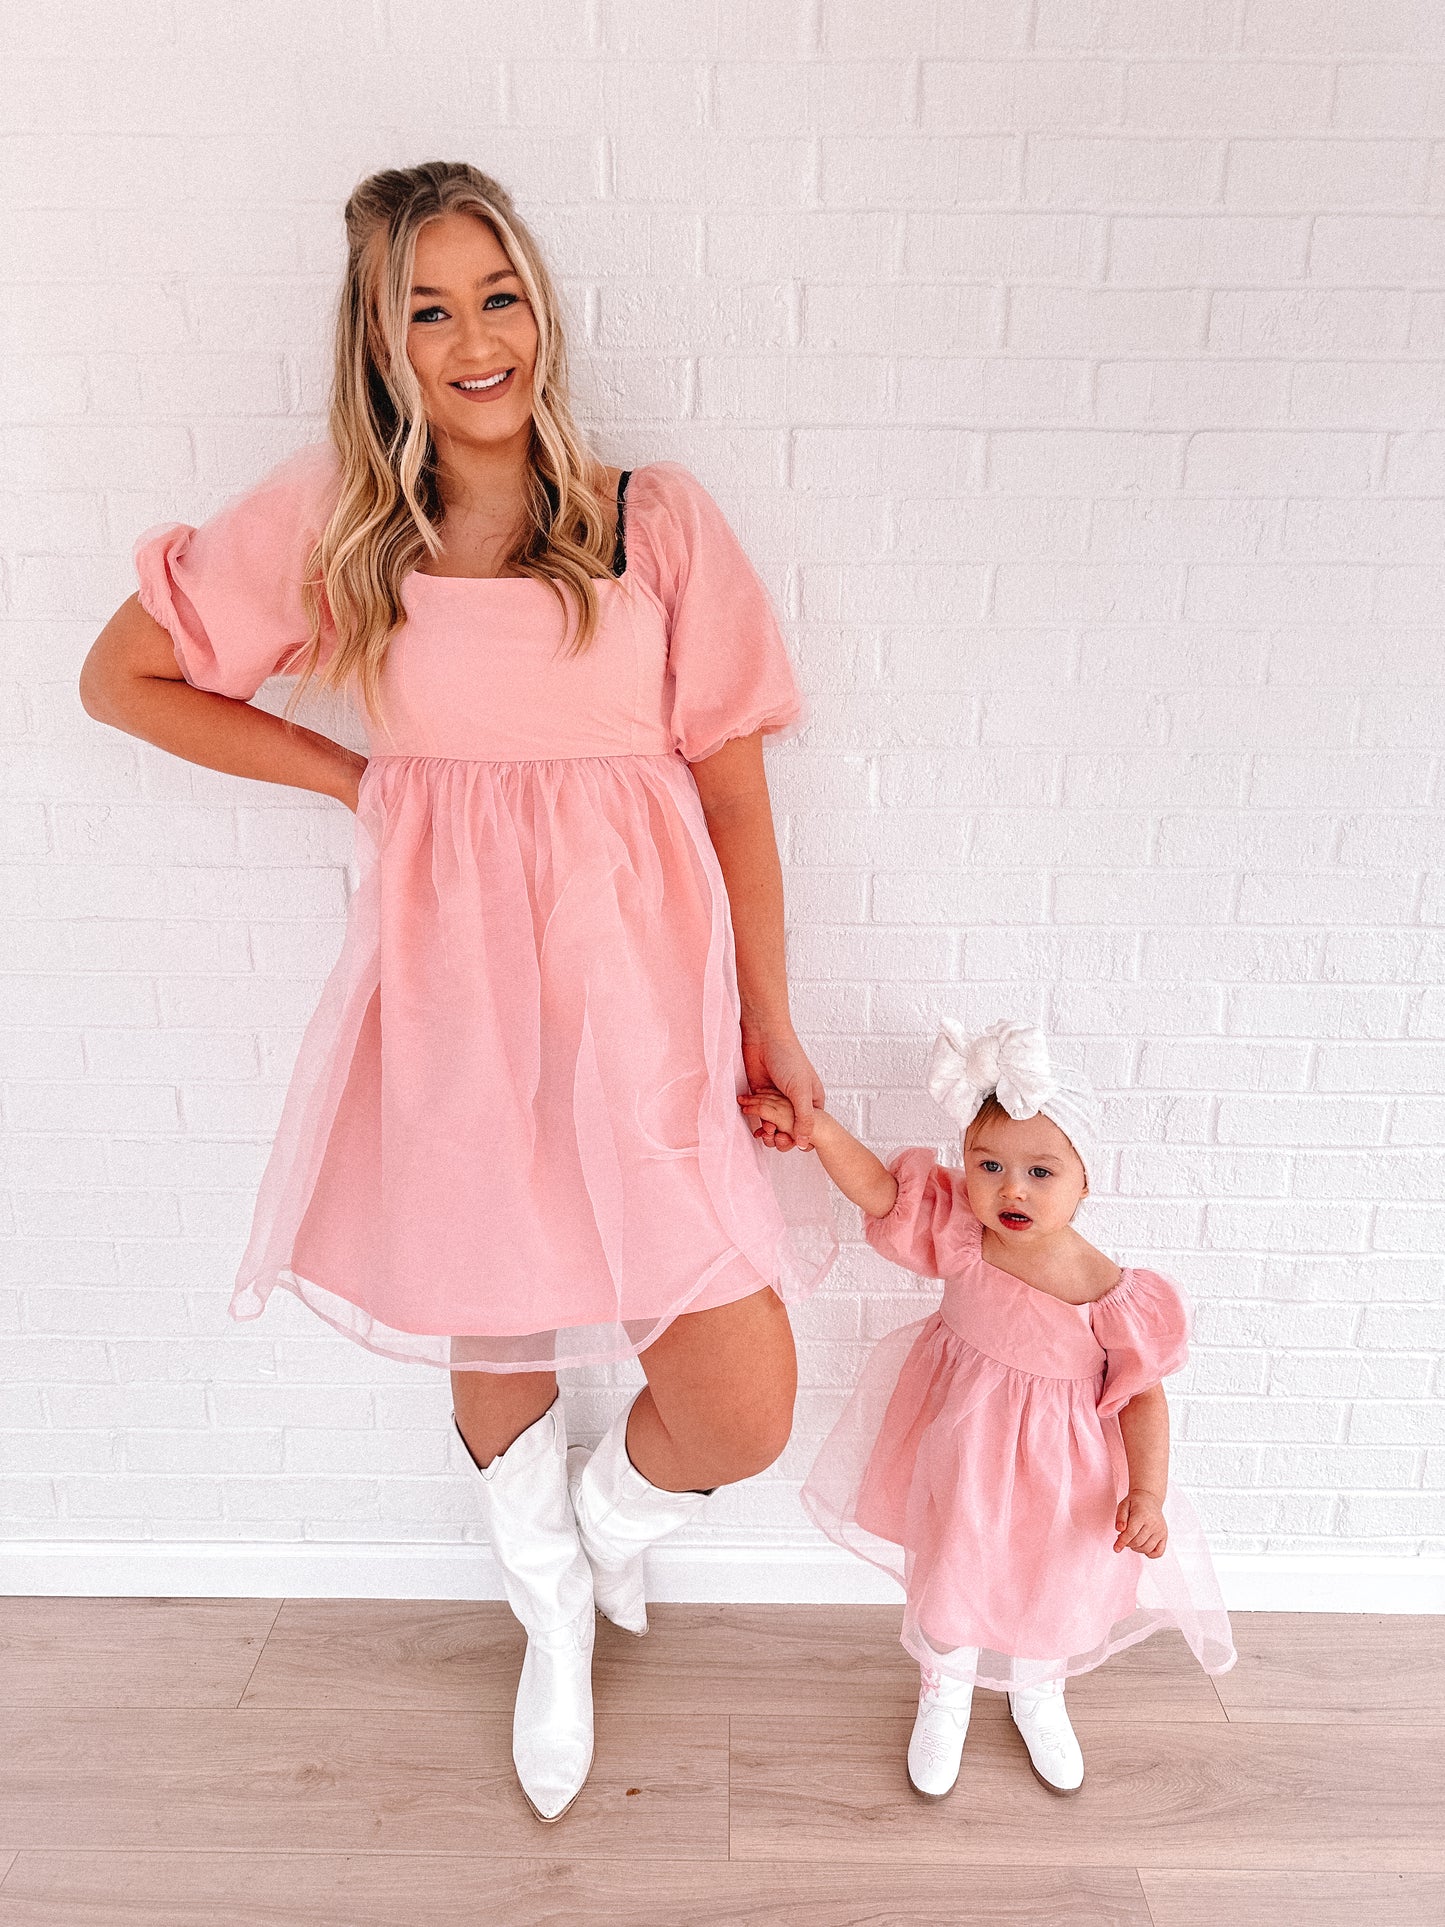 Pastel Pink Mommy and Me Dresses